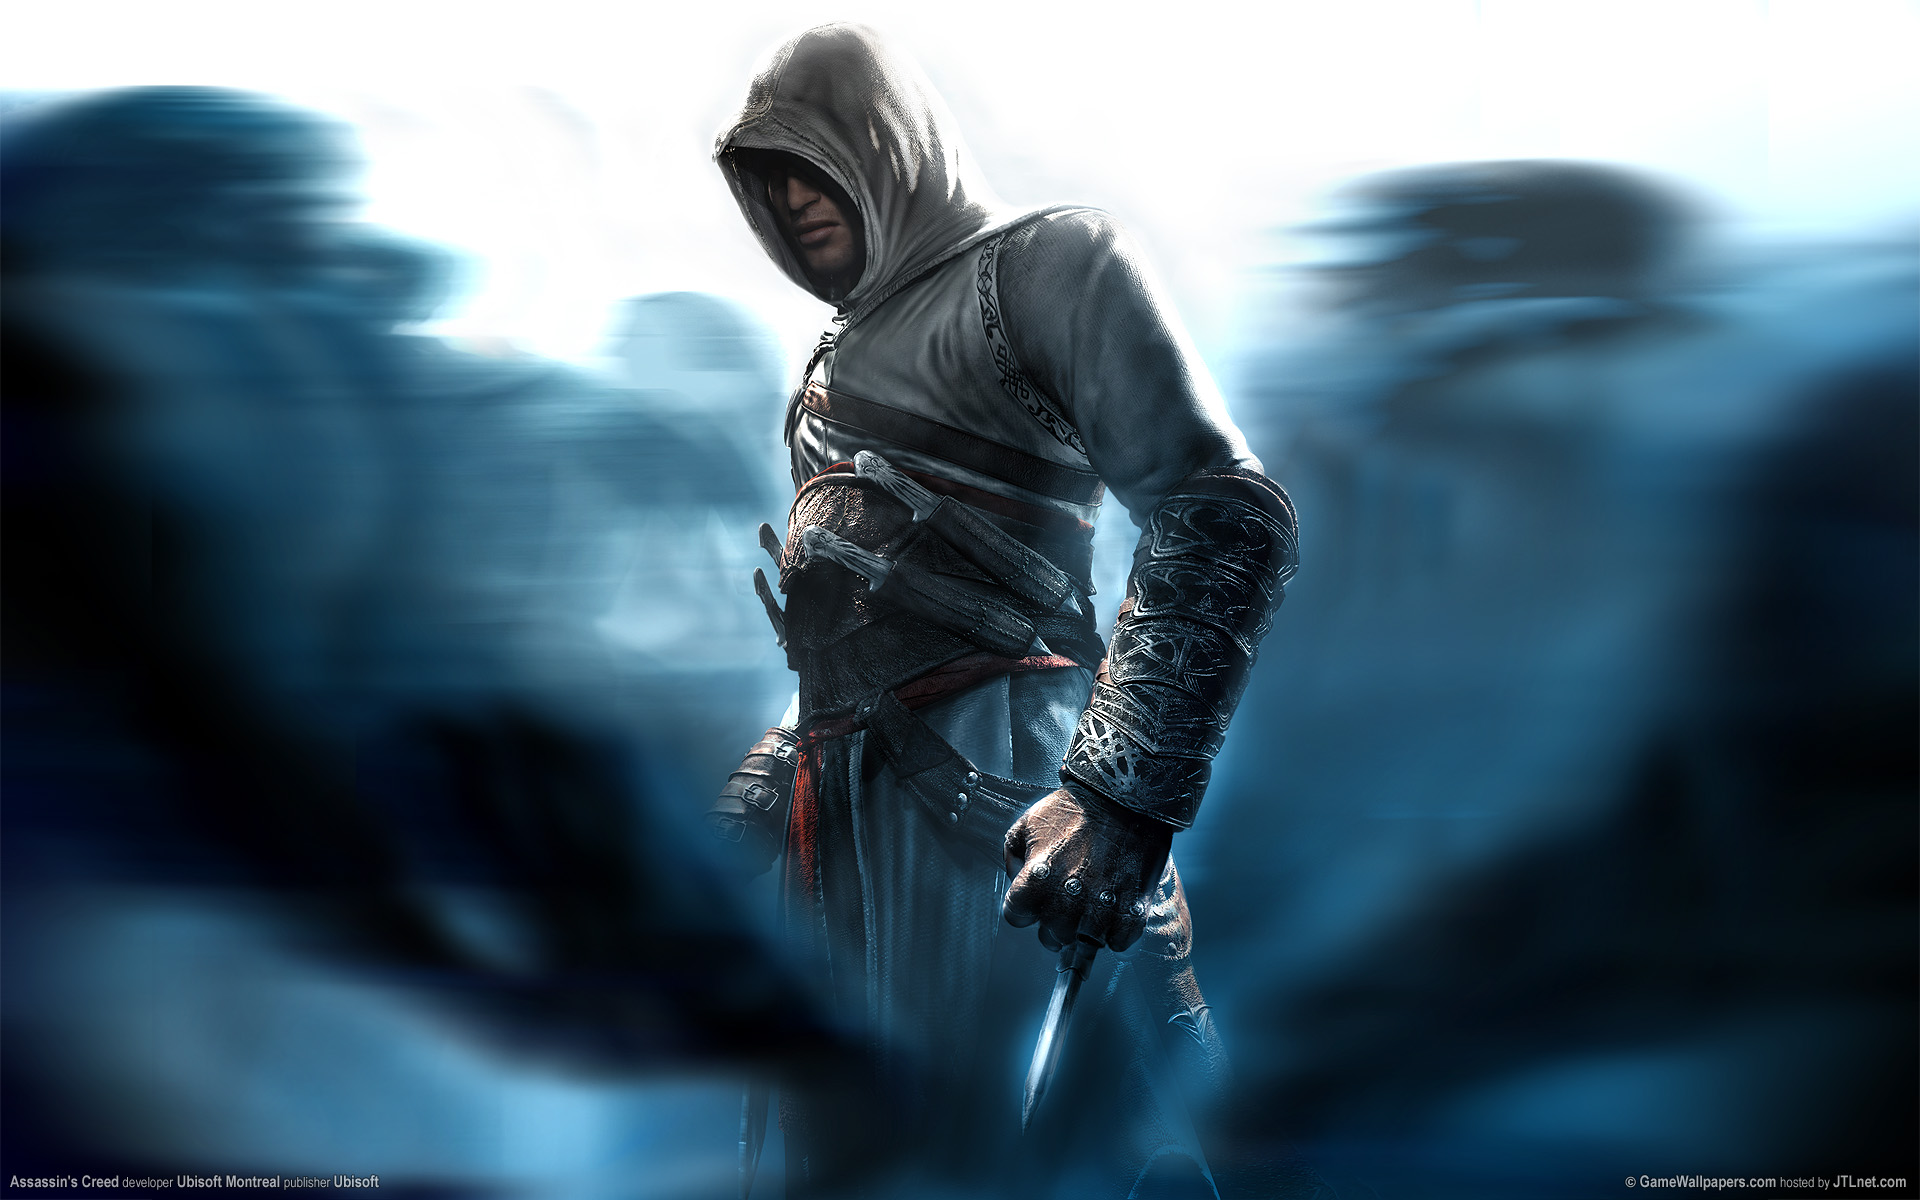 Awesome Assassins Creed wallpaper Assassins Creed wallpapers 1920x1200